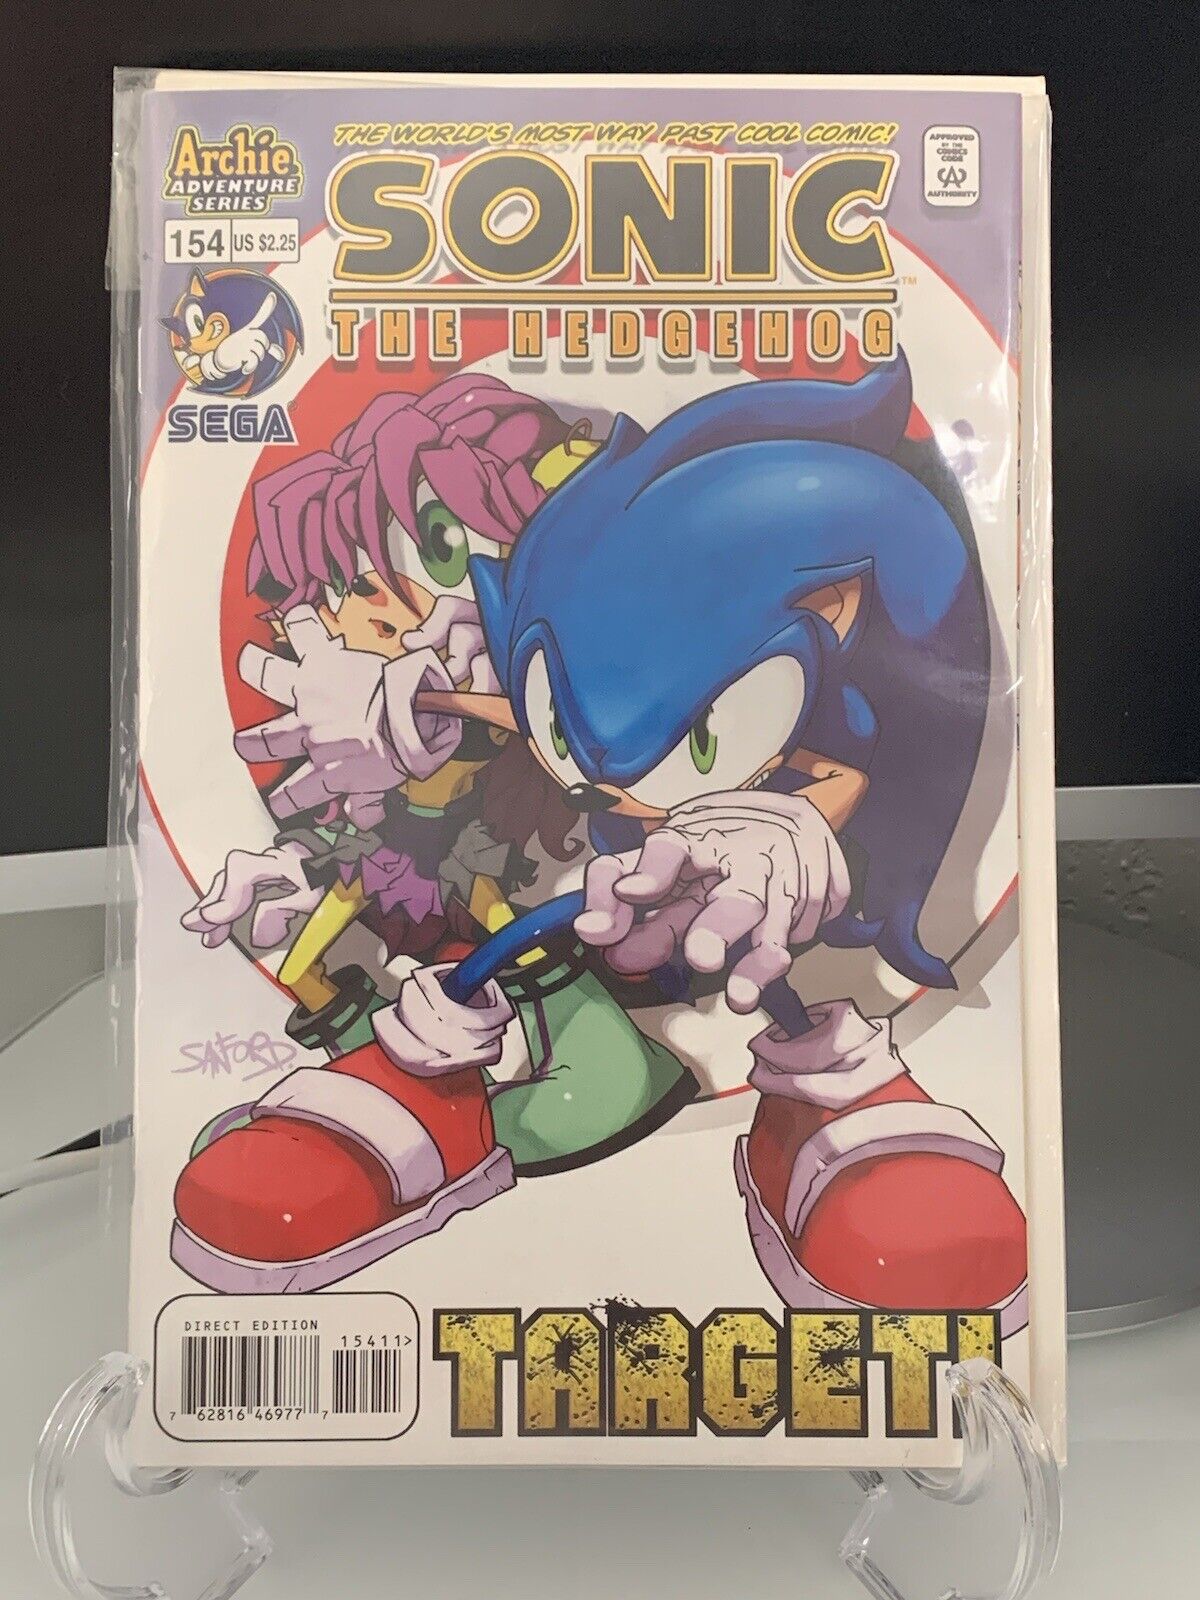 2005 ARCHIE COMICS SEGA SONIC THE HEDGEHOG #154 VF RARE ISSUE HARD TO FIND MOVIE